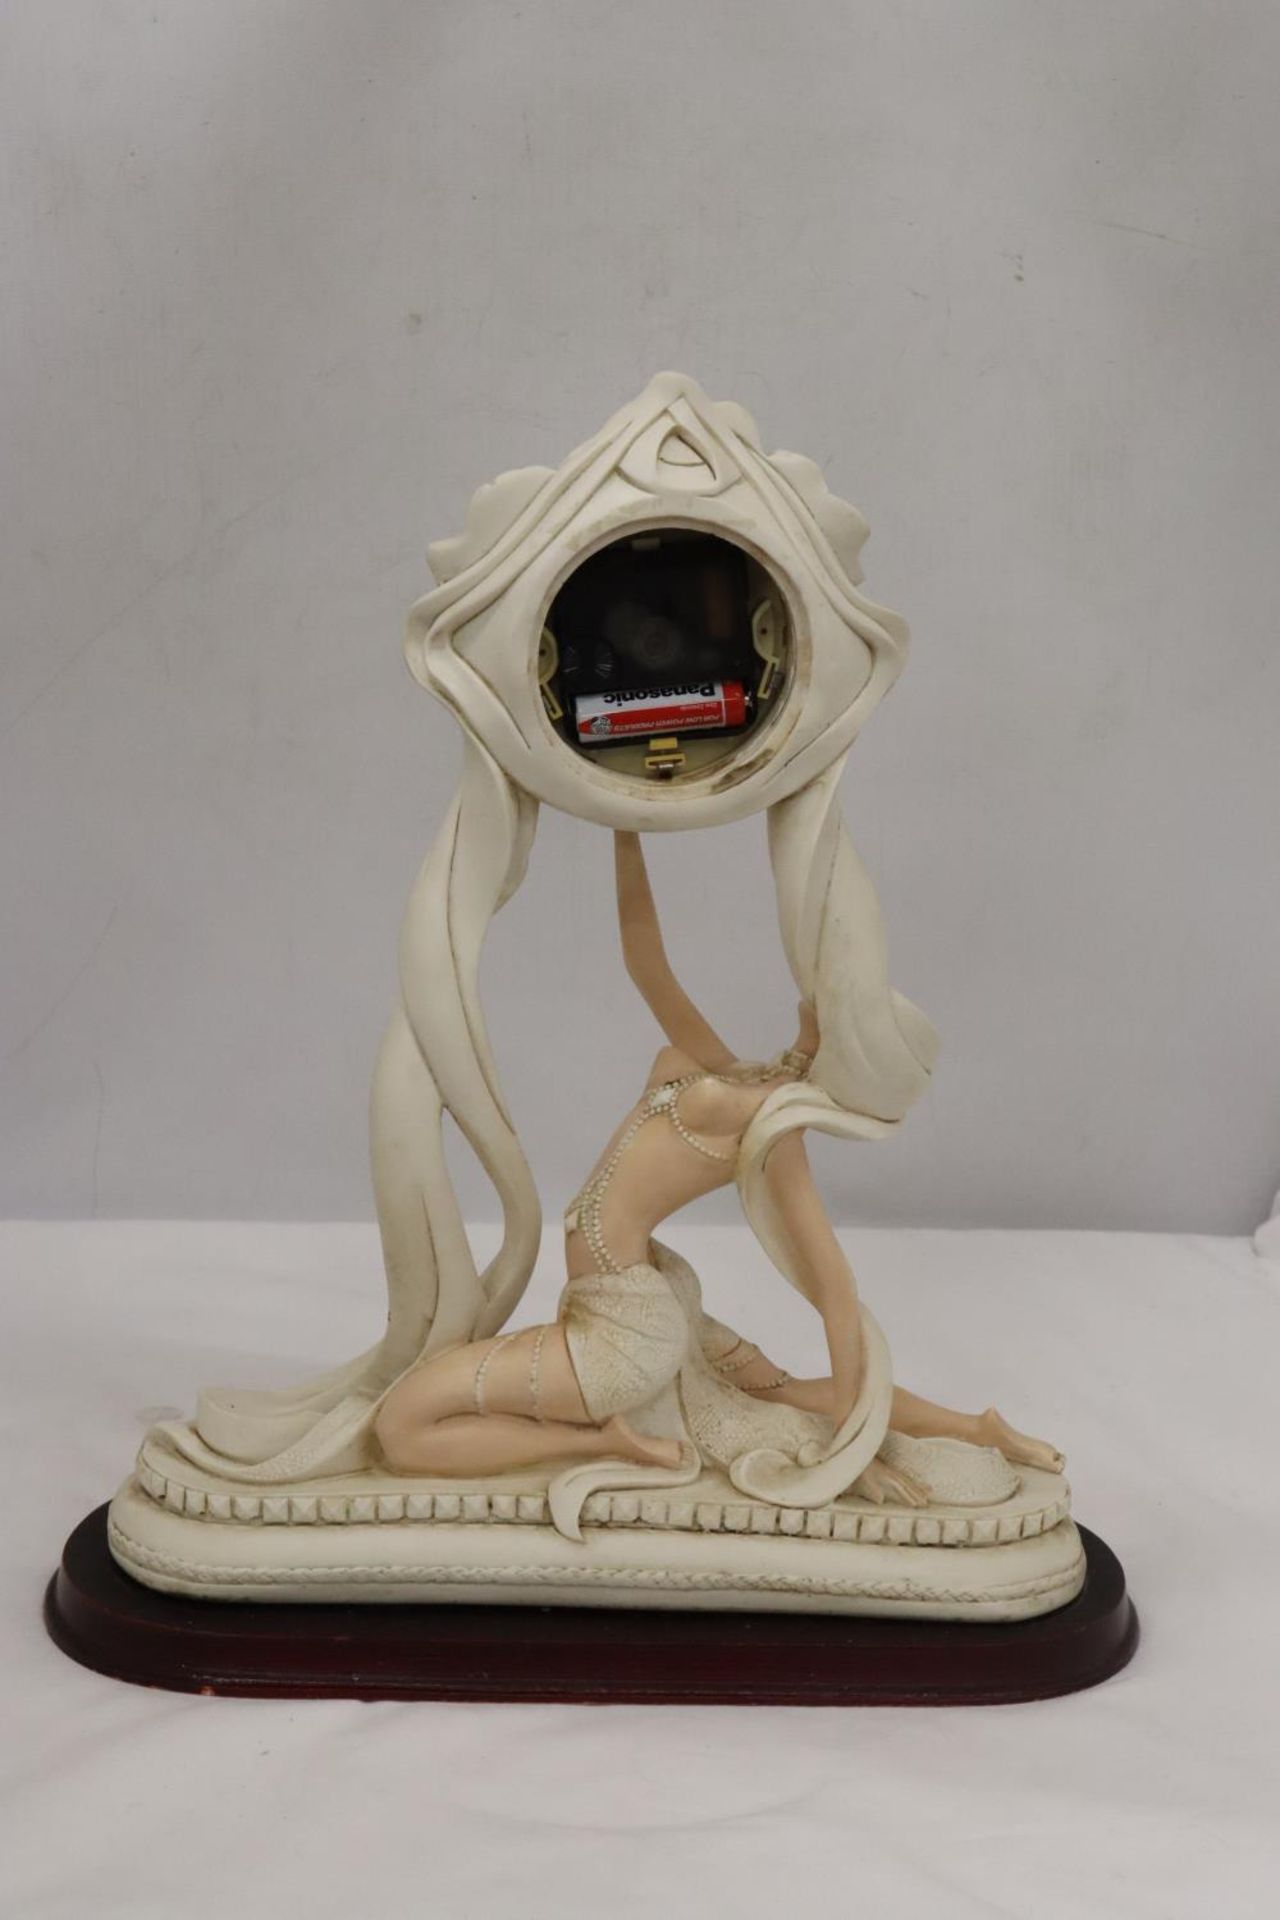 AN ART DECO STYLE MANTLE CLOCK WITH A LADY FIGURINE, HEIGHT 36CM - Image 3 of 7